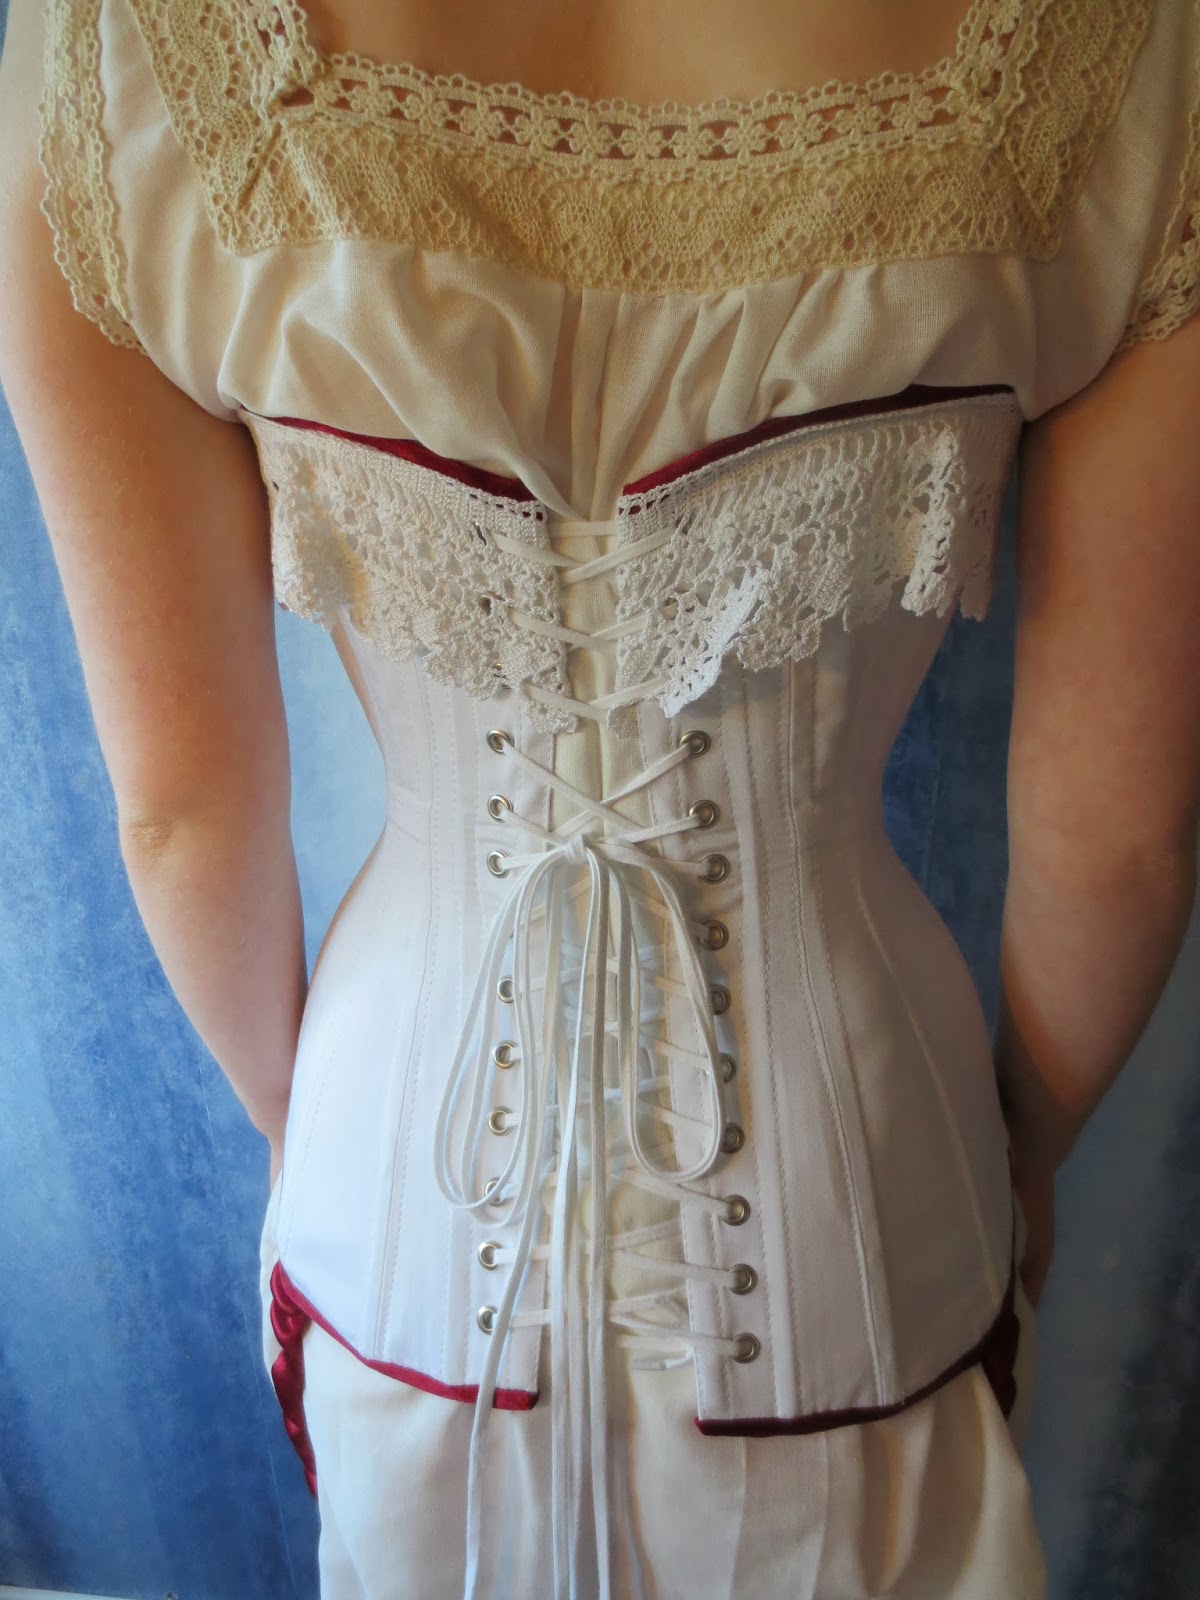 The sewing room: Finished Edwardian corset - HSF 19